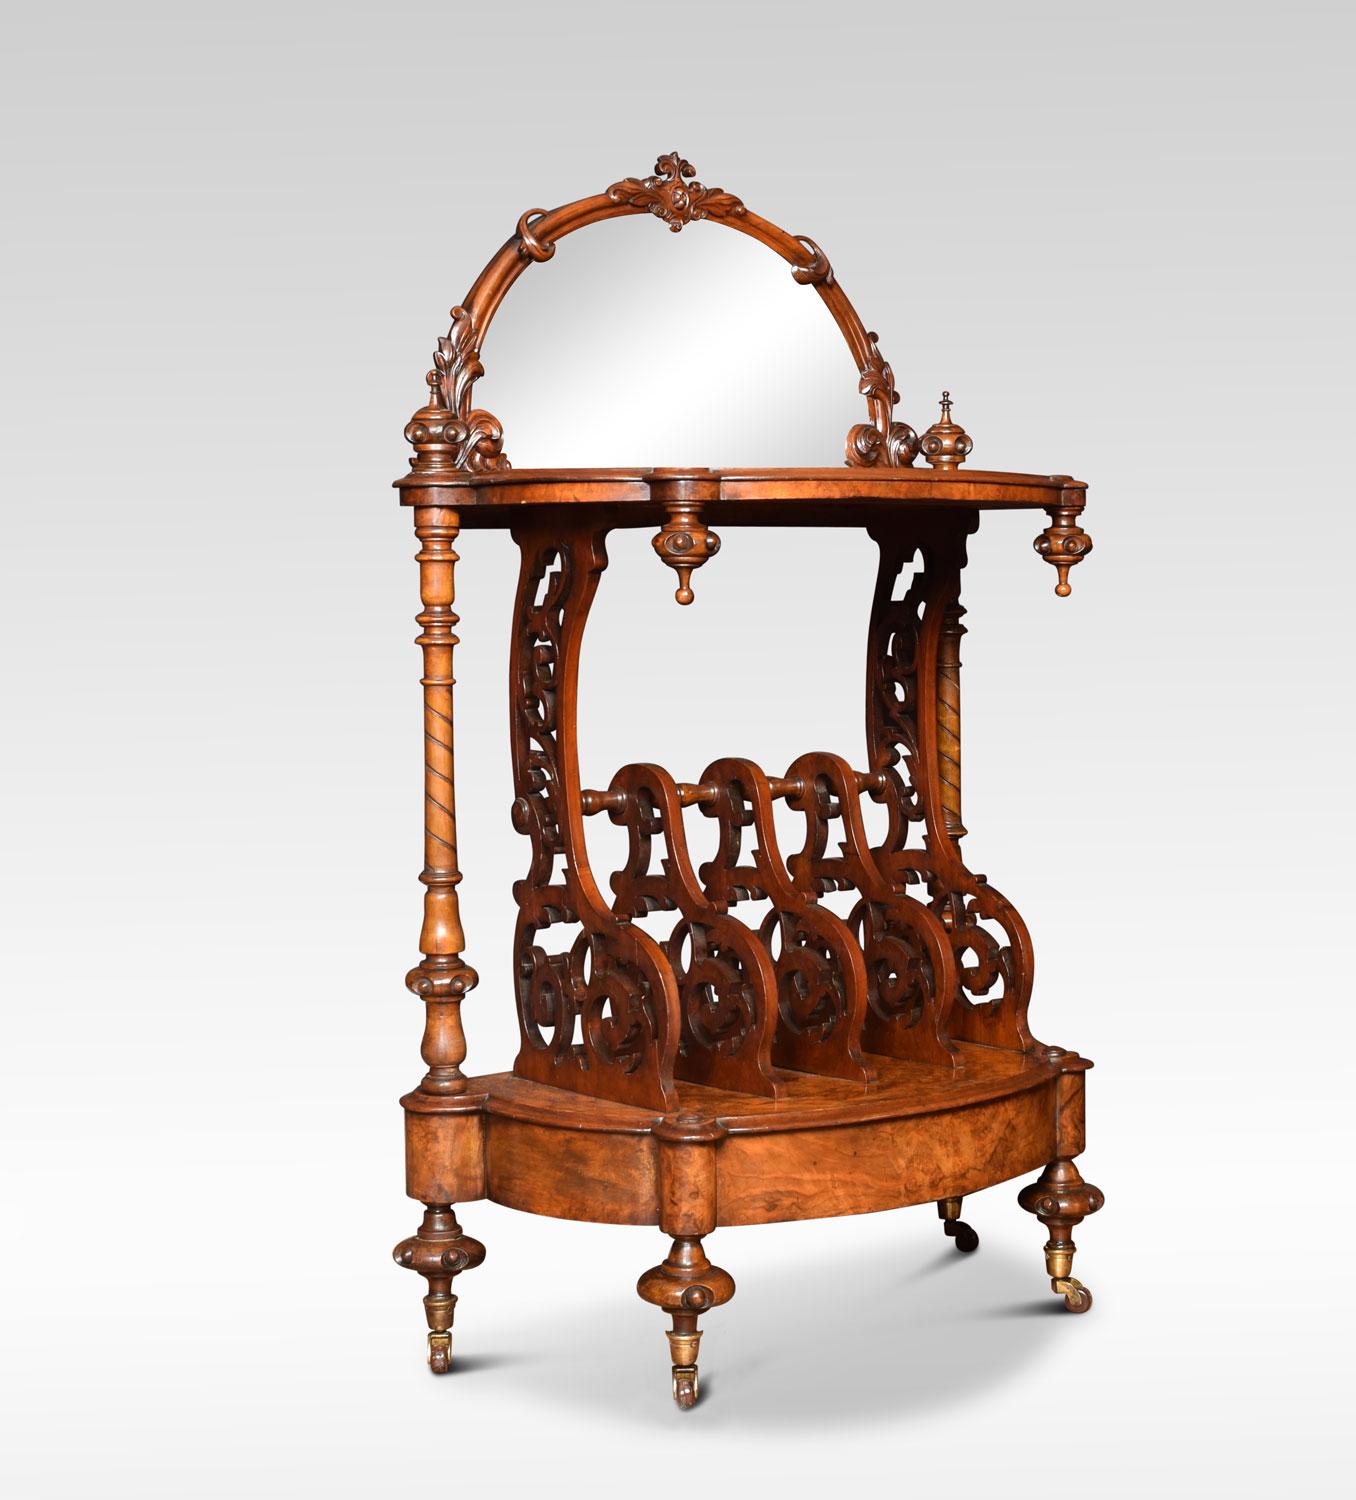 A Victorian burr walnut veneered what-not the mirror back within ornate foliate pierced frame. To the top of bowed outline with pendant drops above a four compartment front joined by turned spindles. Flanked by spirally fluted pillars, on shaped